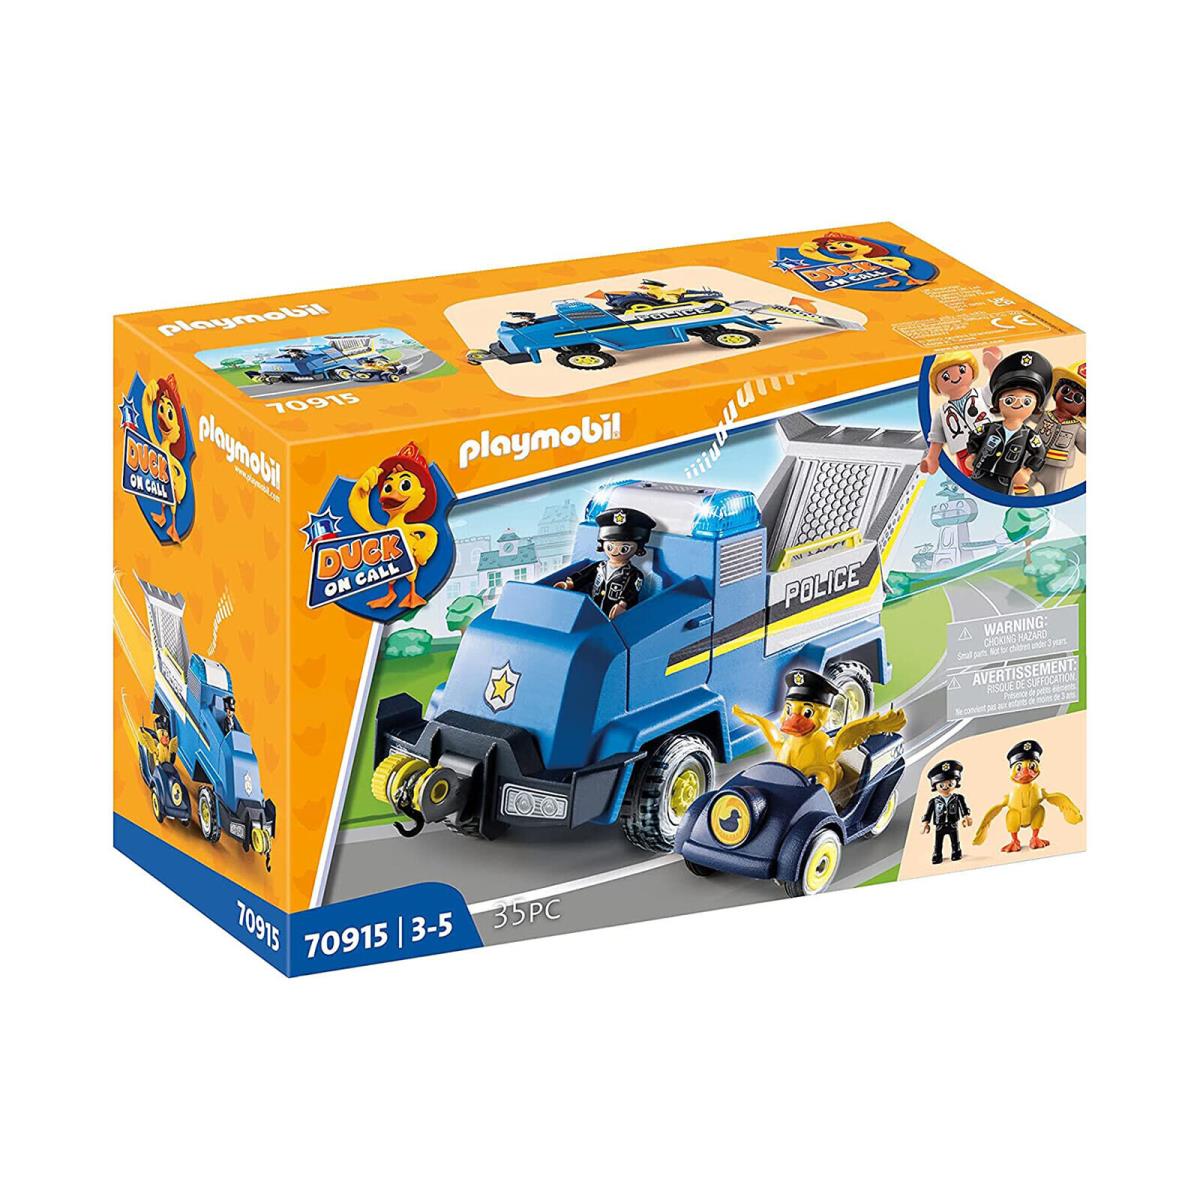 Playmobil Duck On Call Police Emergency Vehicle Building Set 70915 IN Stock